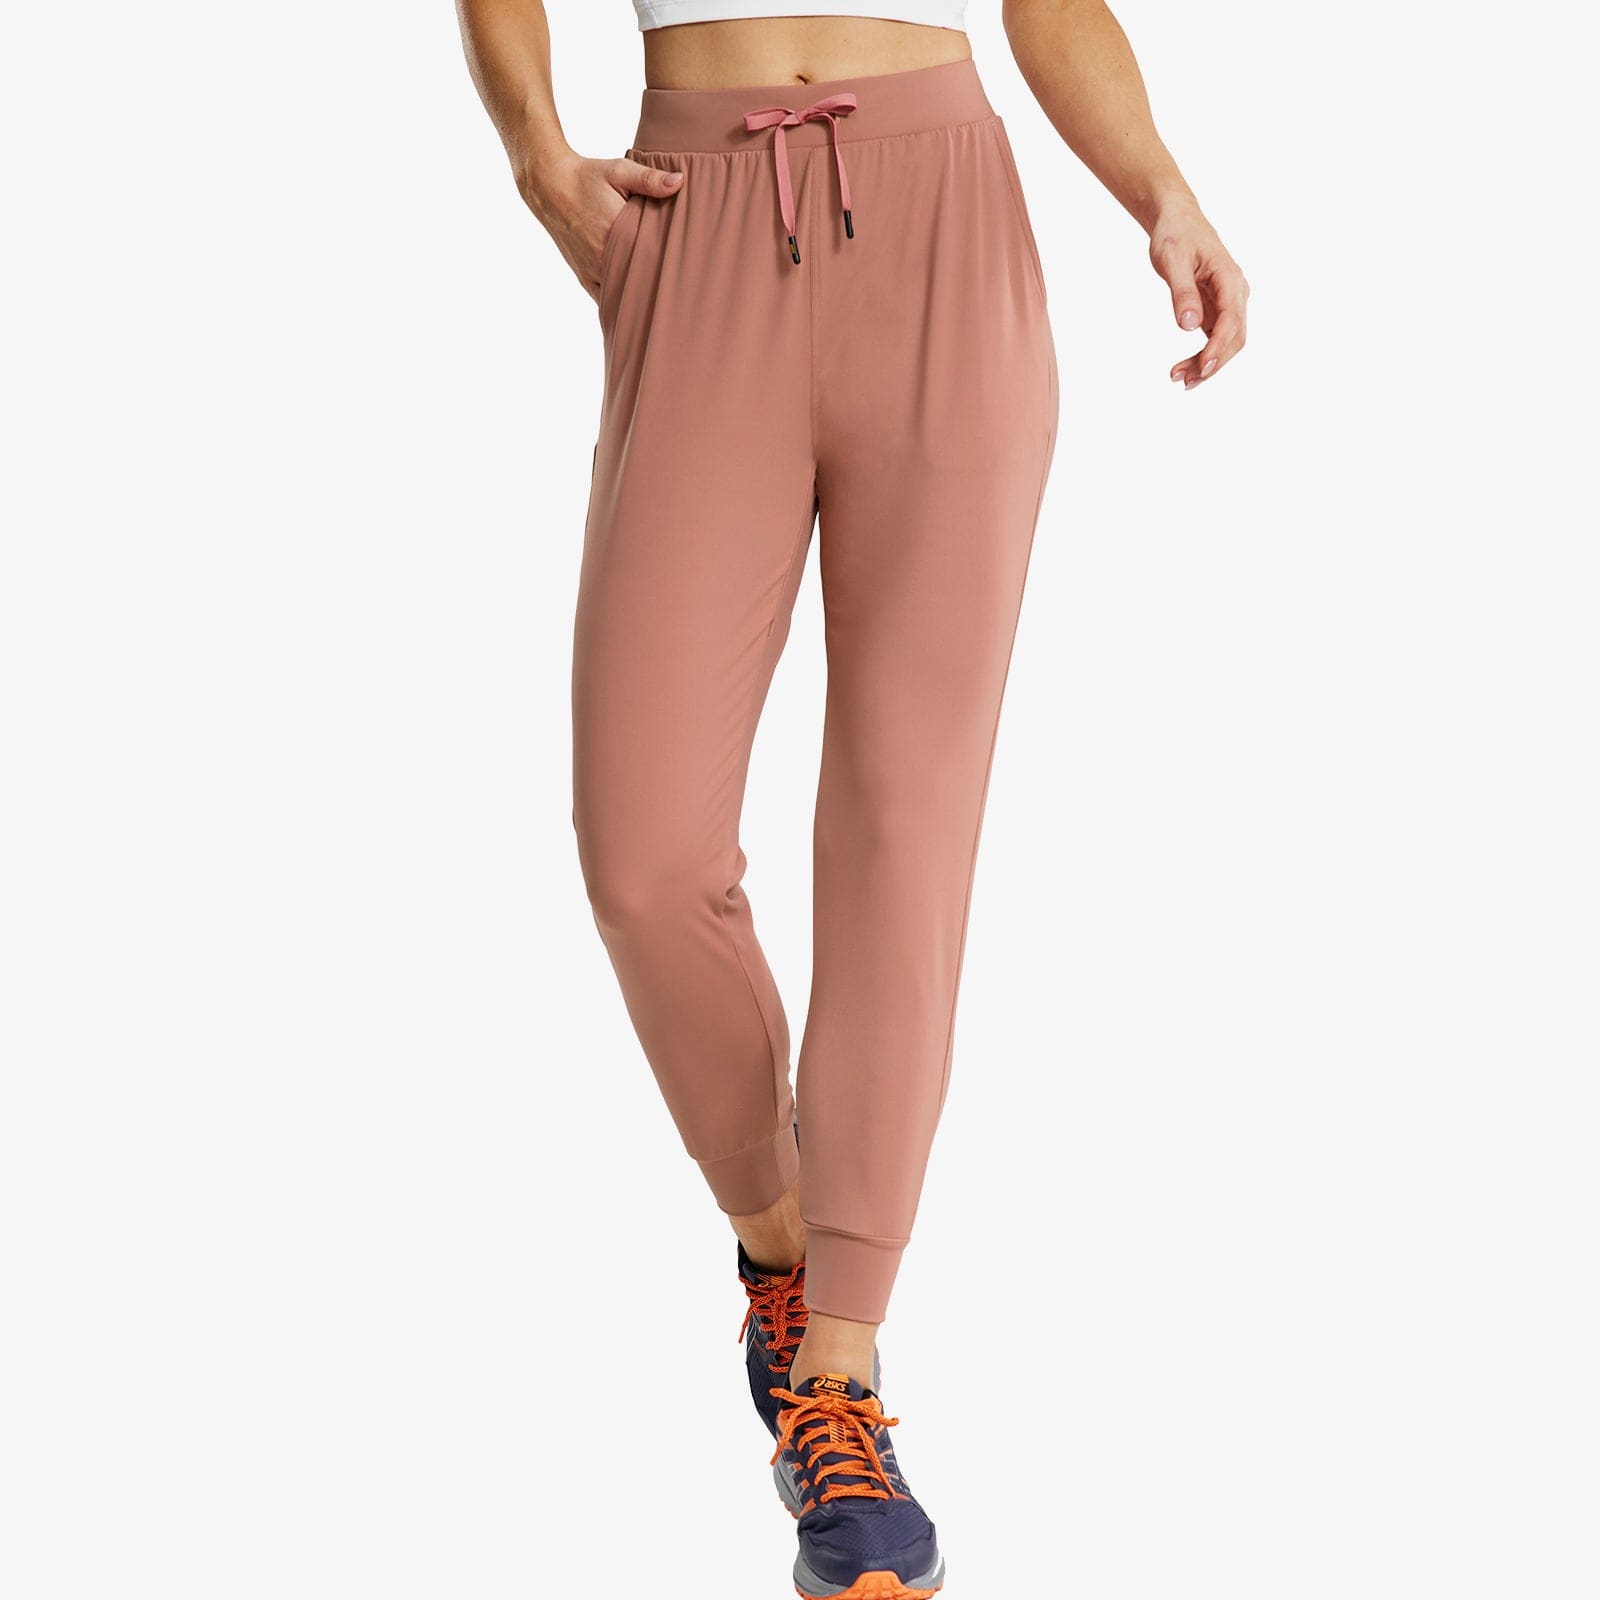 Women Joggers with Pockets Lightweight Athletic Sweatpants Women Active Pants Dusty Pink / XS MIER